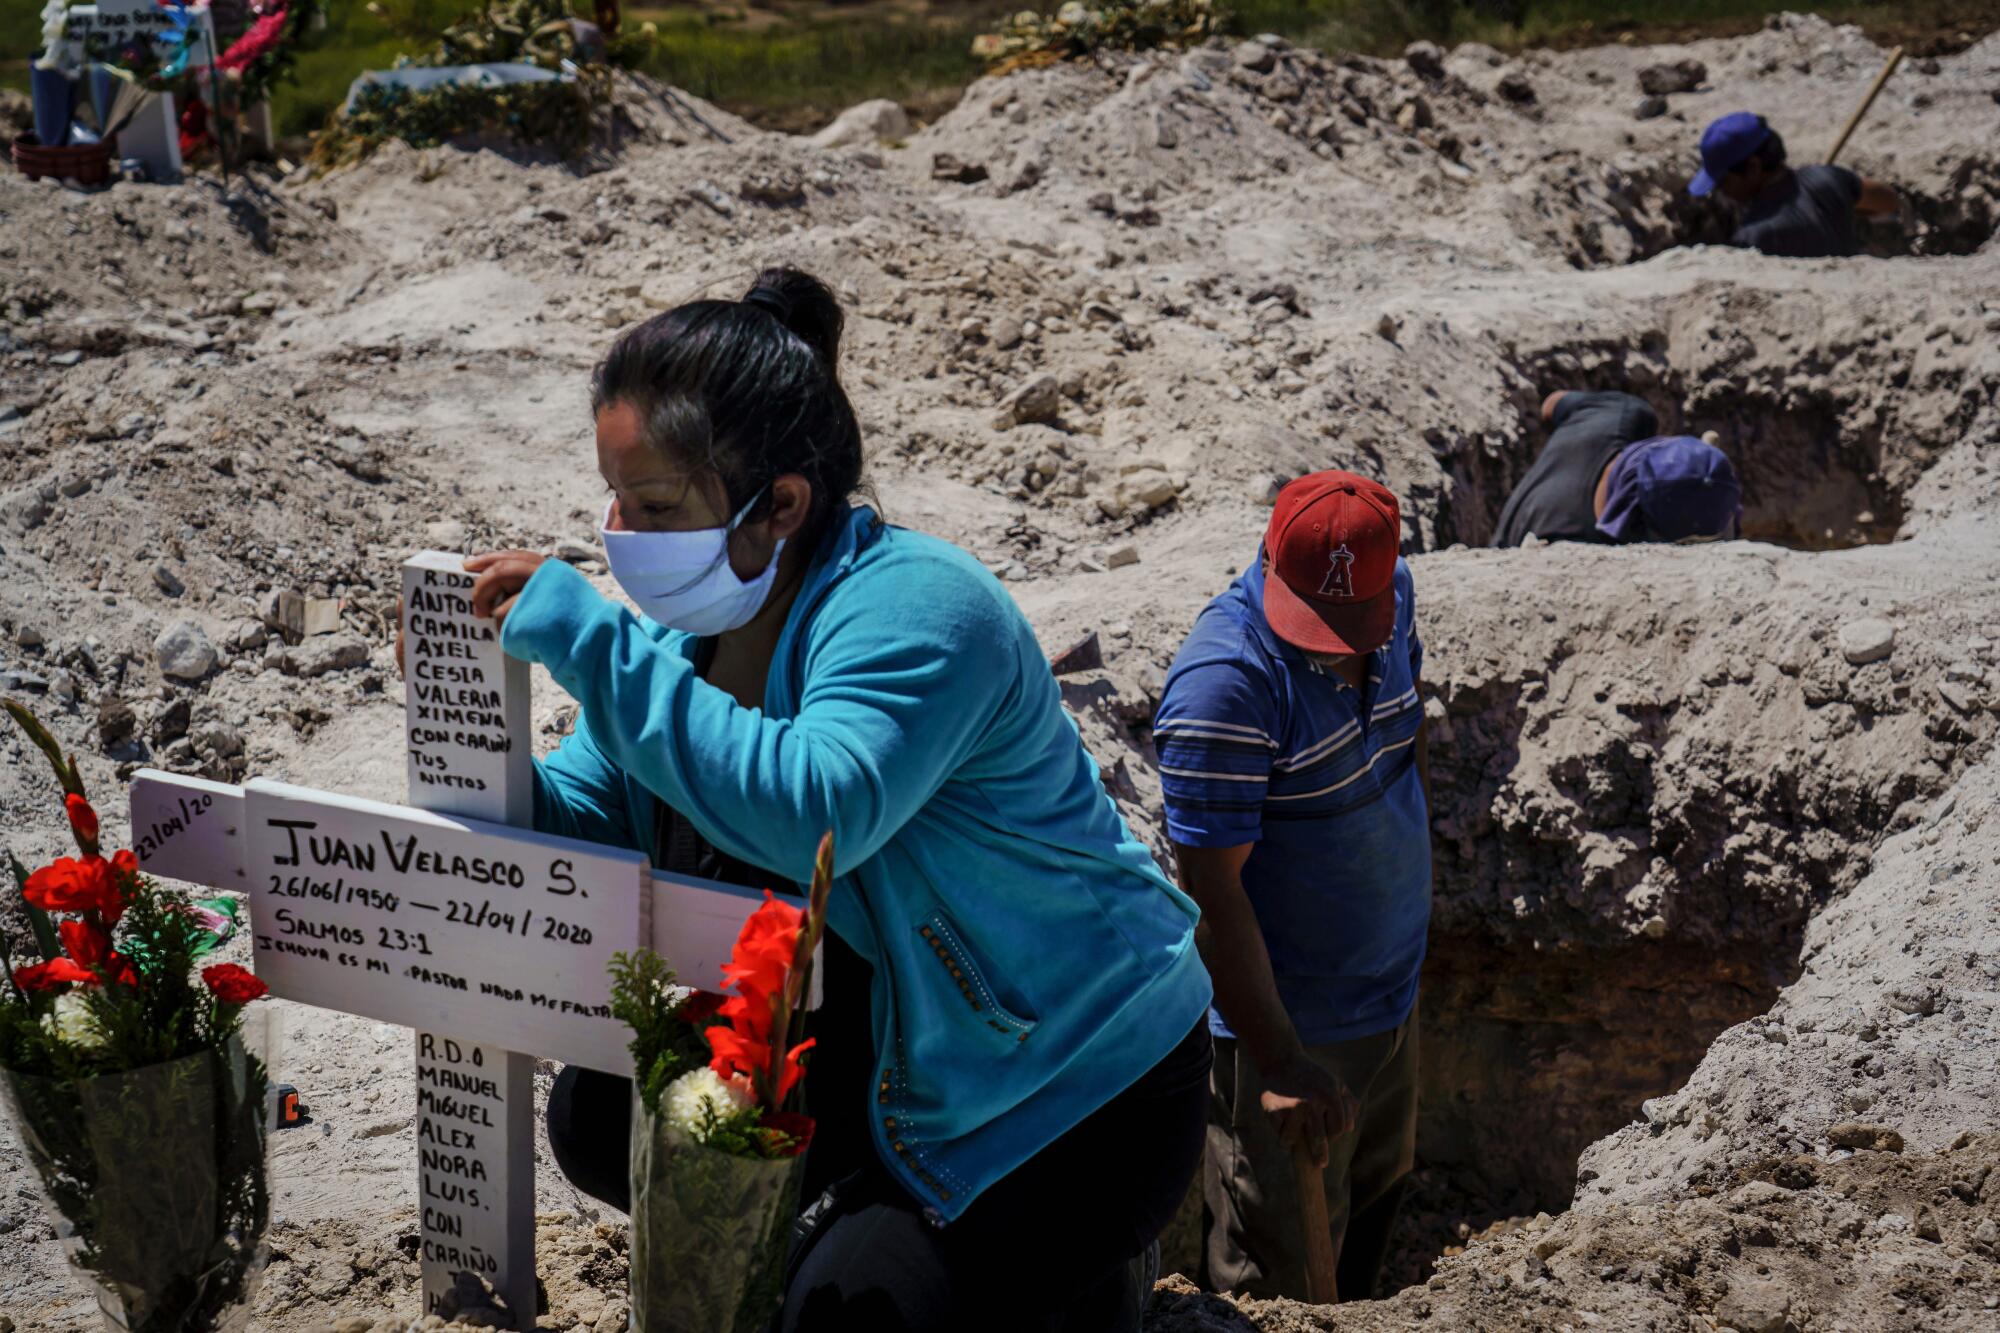 At Tijuana's Municipal Cemetery No. 13, Nora Lassete marks the burial cross after the funeral of Juan Velasco, who died of COVID-19 symptoms.